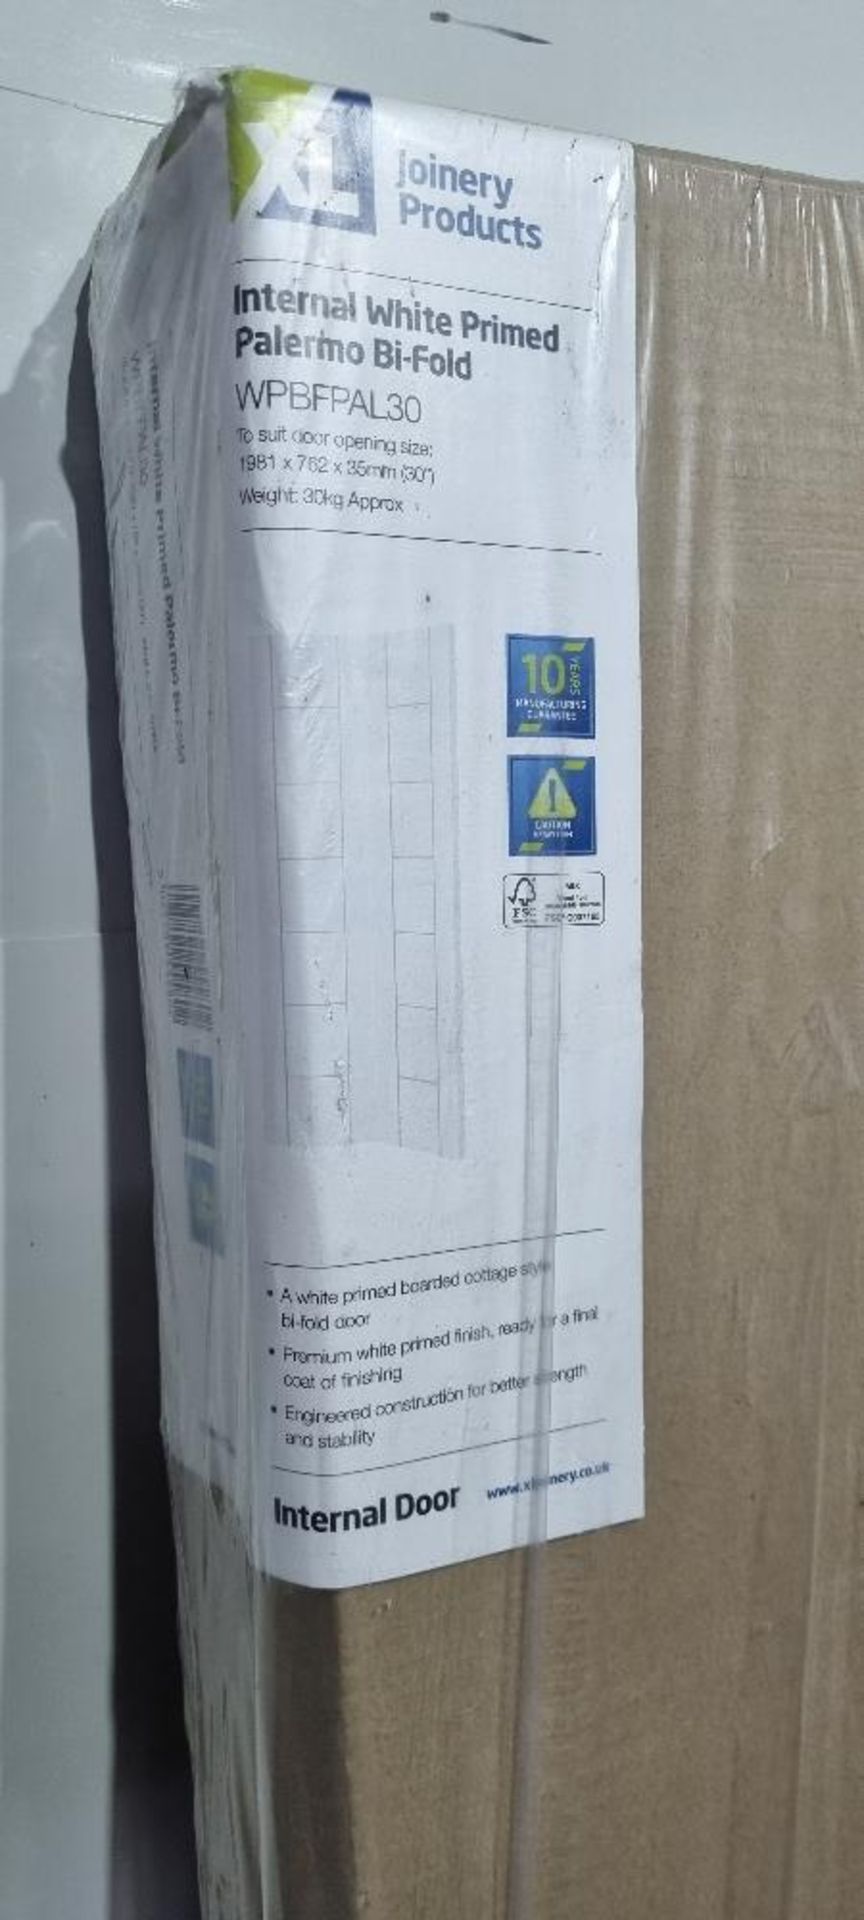 XL Joinery WPBFPAL30 Internal White Primed Palermo Bi Fold Door | 1981mm x 762mm x 35mm - Image 2 of 4